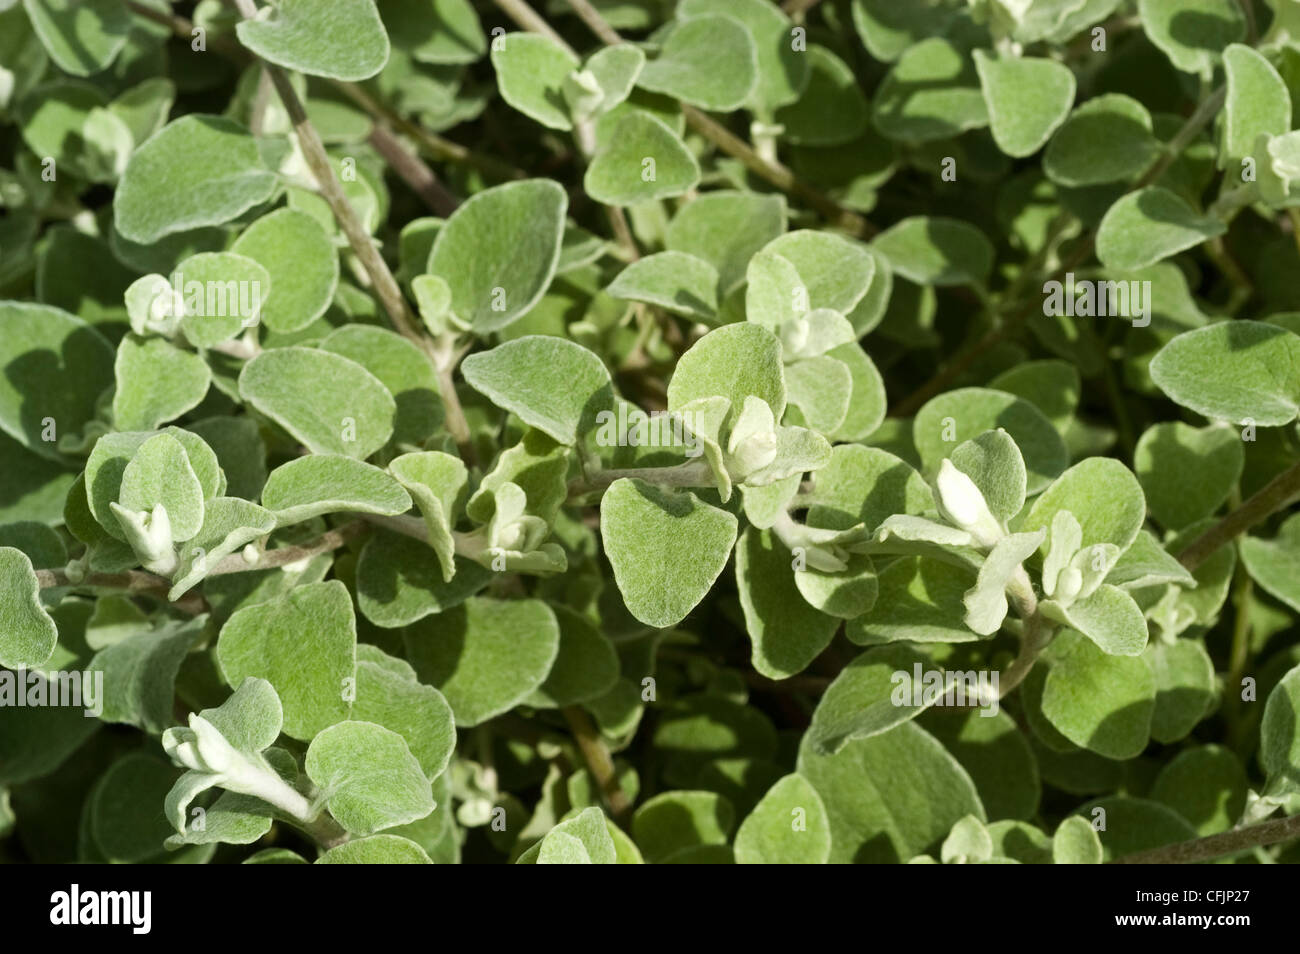 Foliage, leaves of Licorice Plant, Helichrysum petiolare, Silver-bush Everlasting Flower, Trailing Dusty-miller Stock Photo